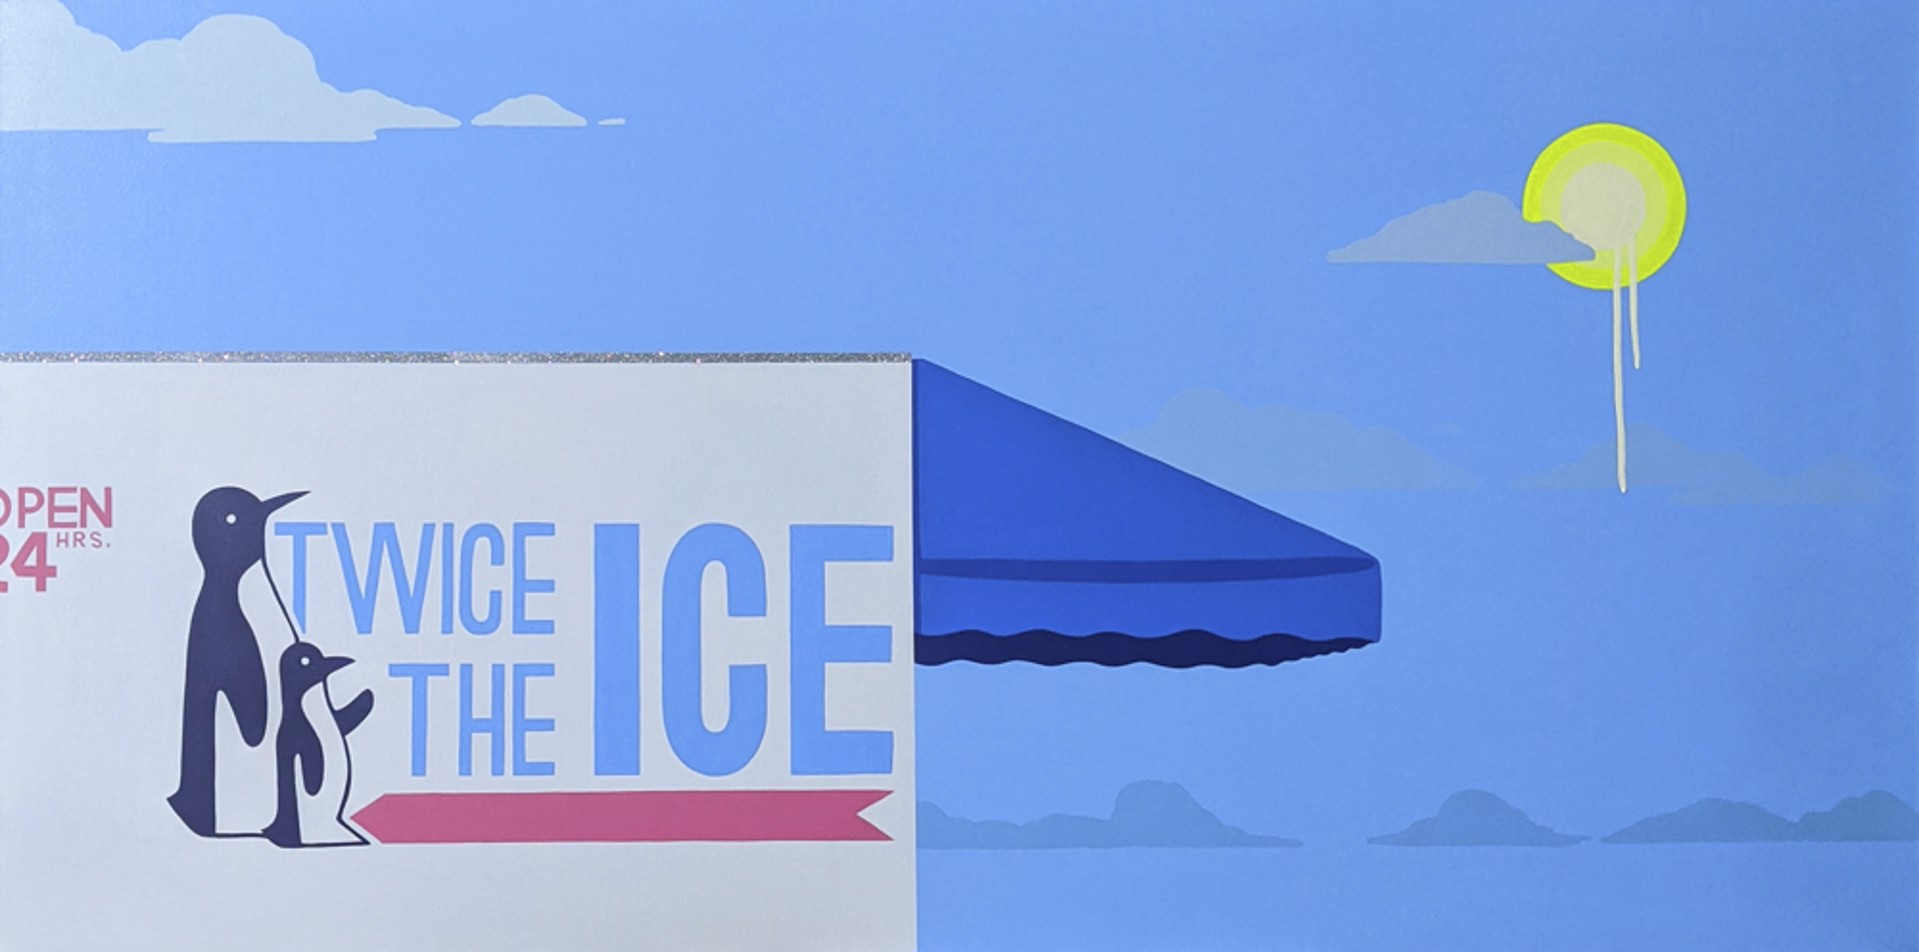 Twice the Ice by Honor Bowman Hall